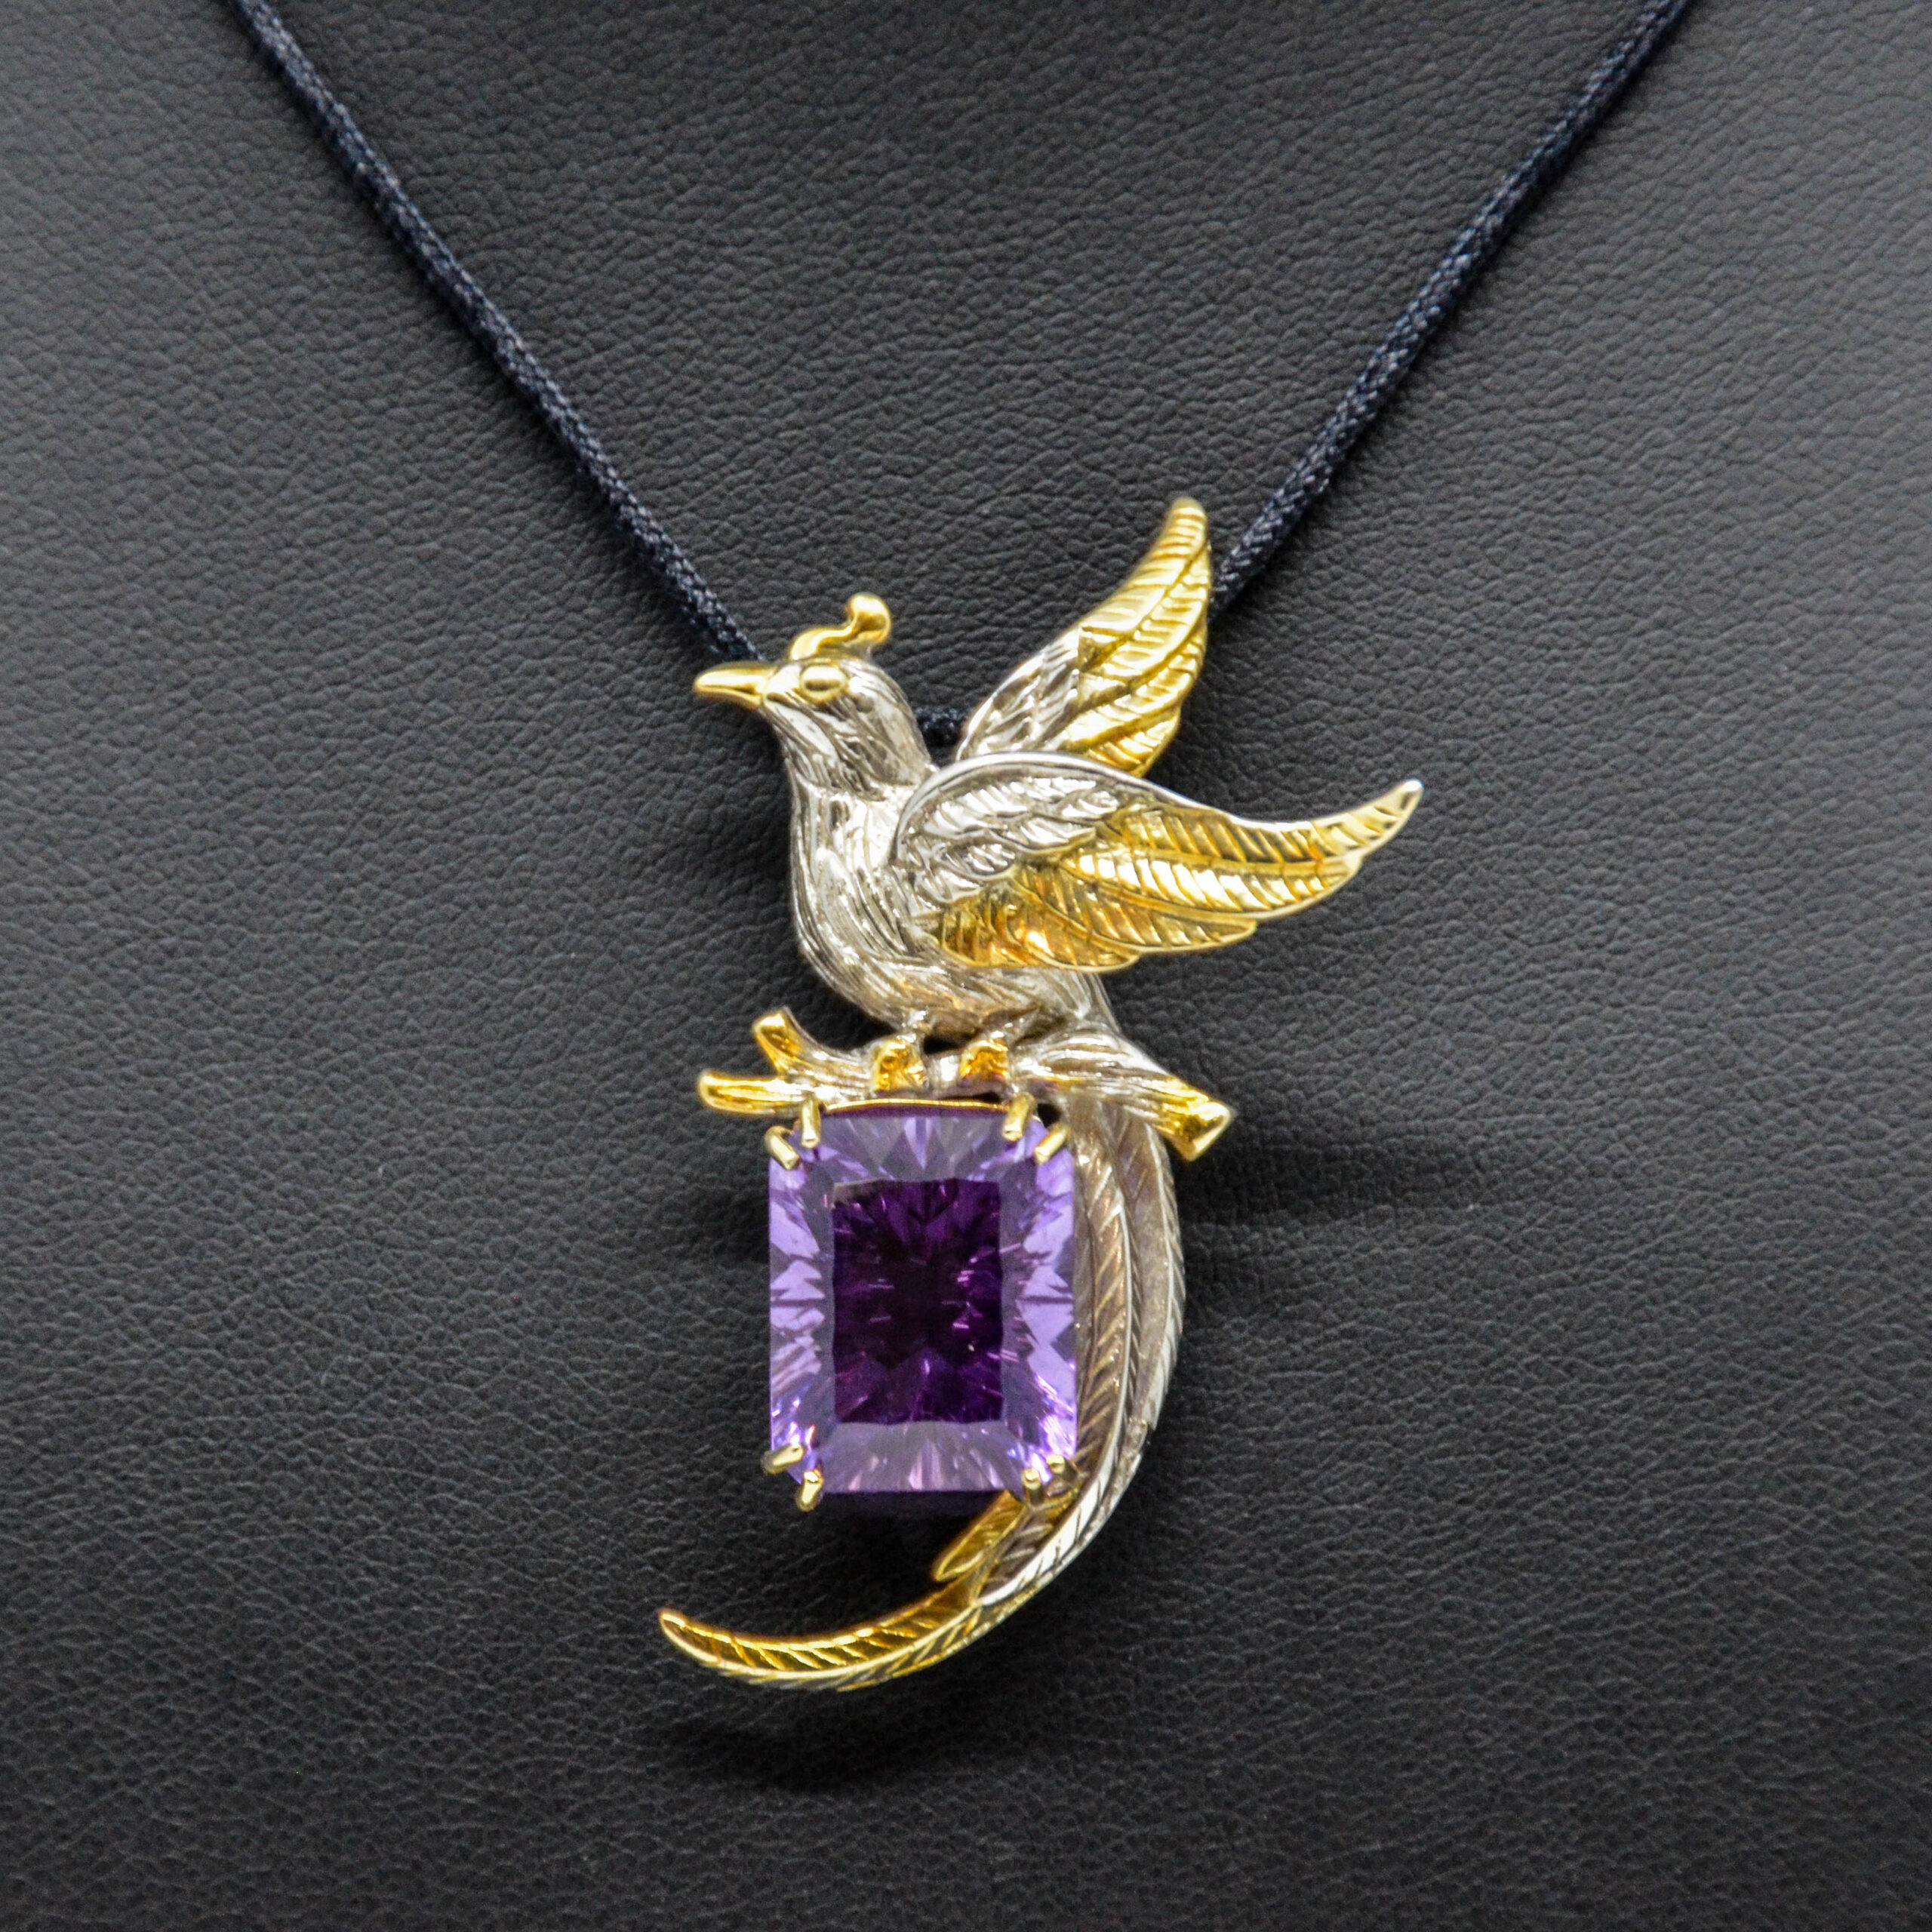 Rare Natural Himalayan Clear Amethyst Emerald Cut Pendant Necklace with Silver and Gold Colored Metal Setting, Bird Design